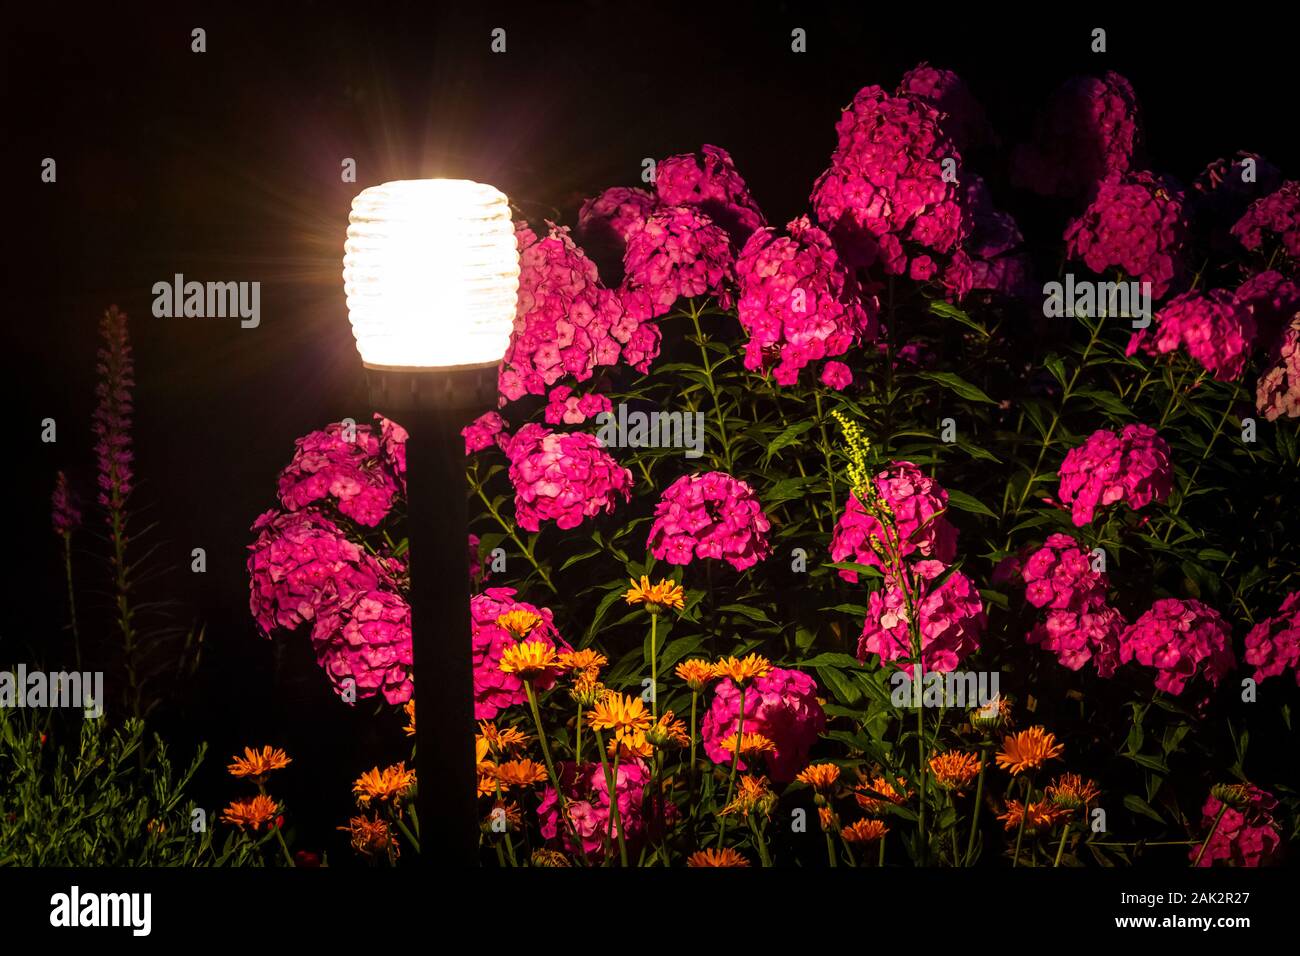 The garden lamp shines in a flower bed in a night garden Stock Photo - Alamy